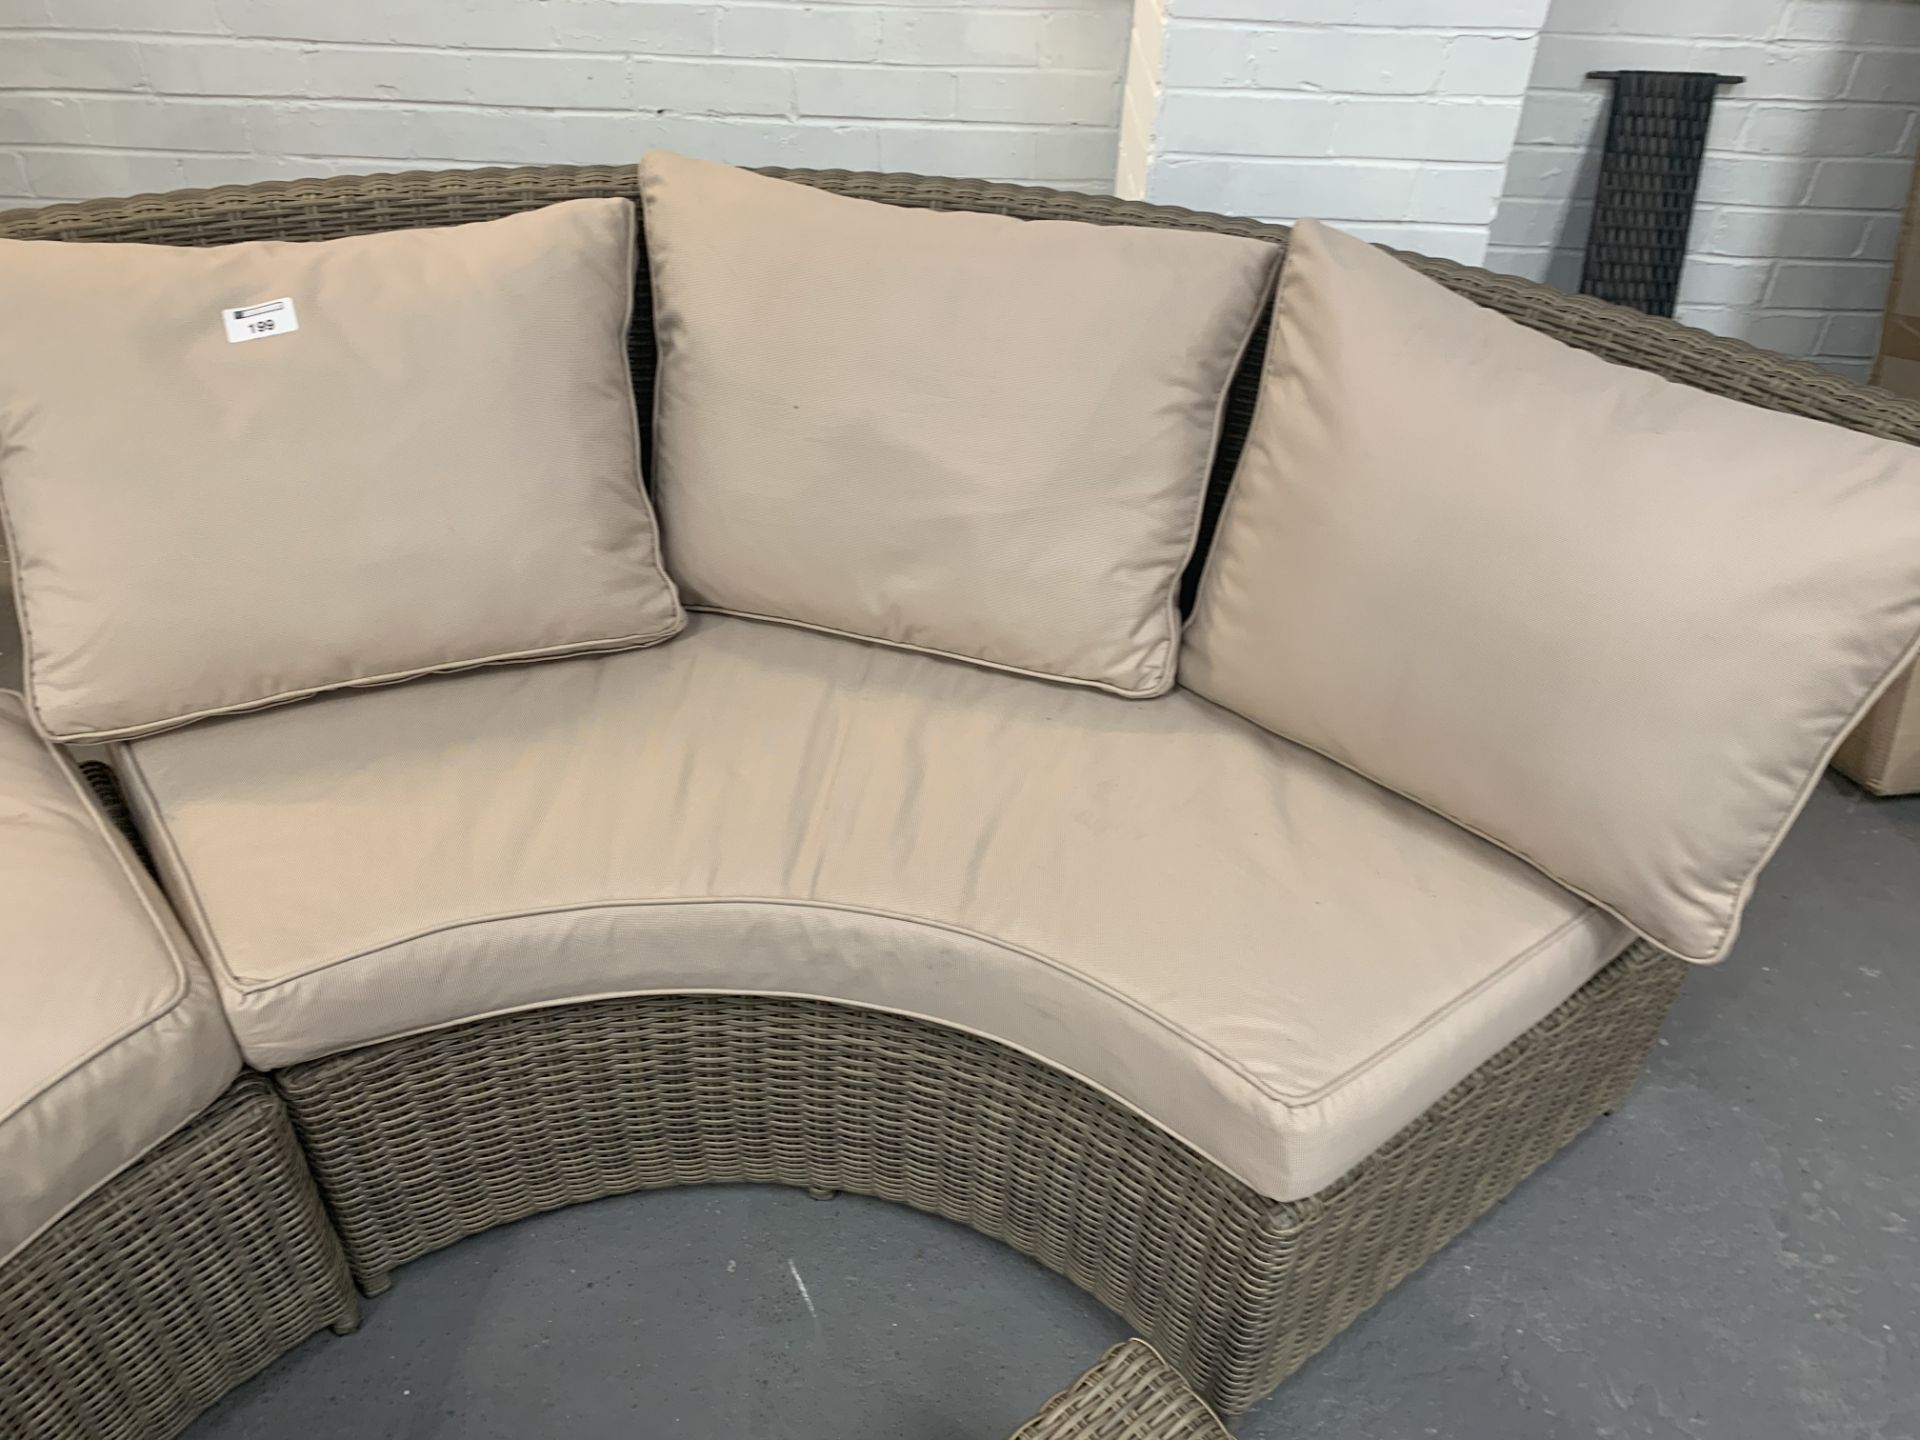 Maze Rattan light brown 2 piece curved sofa with 2 matching foot stools - Image 3 of 4